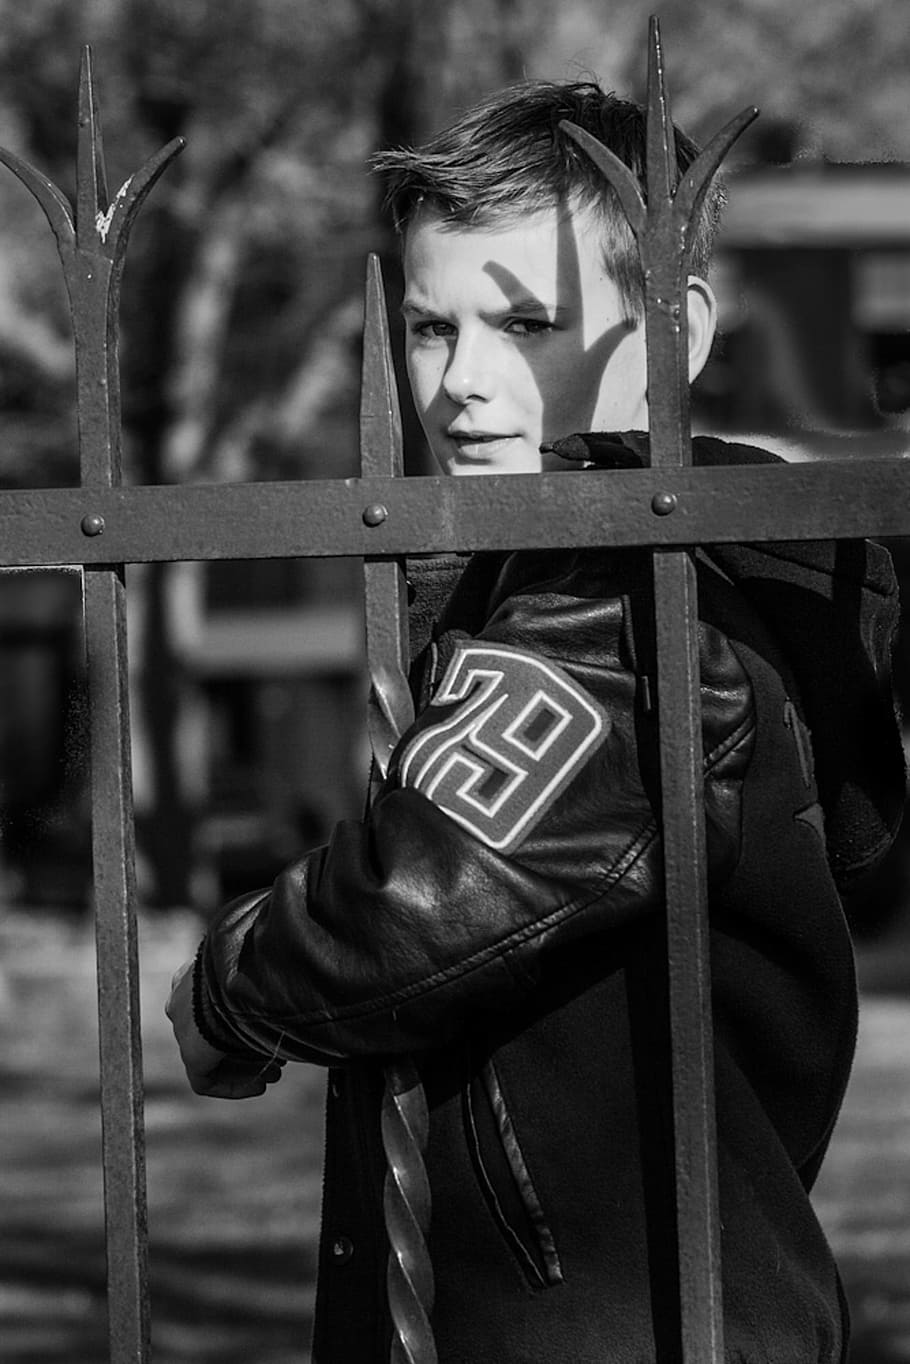 fence, boy, tough, wait, outdoor, child, watch, stand, winter, youth